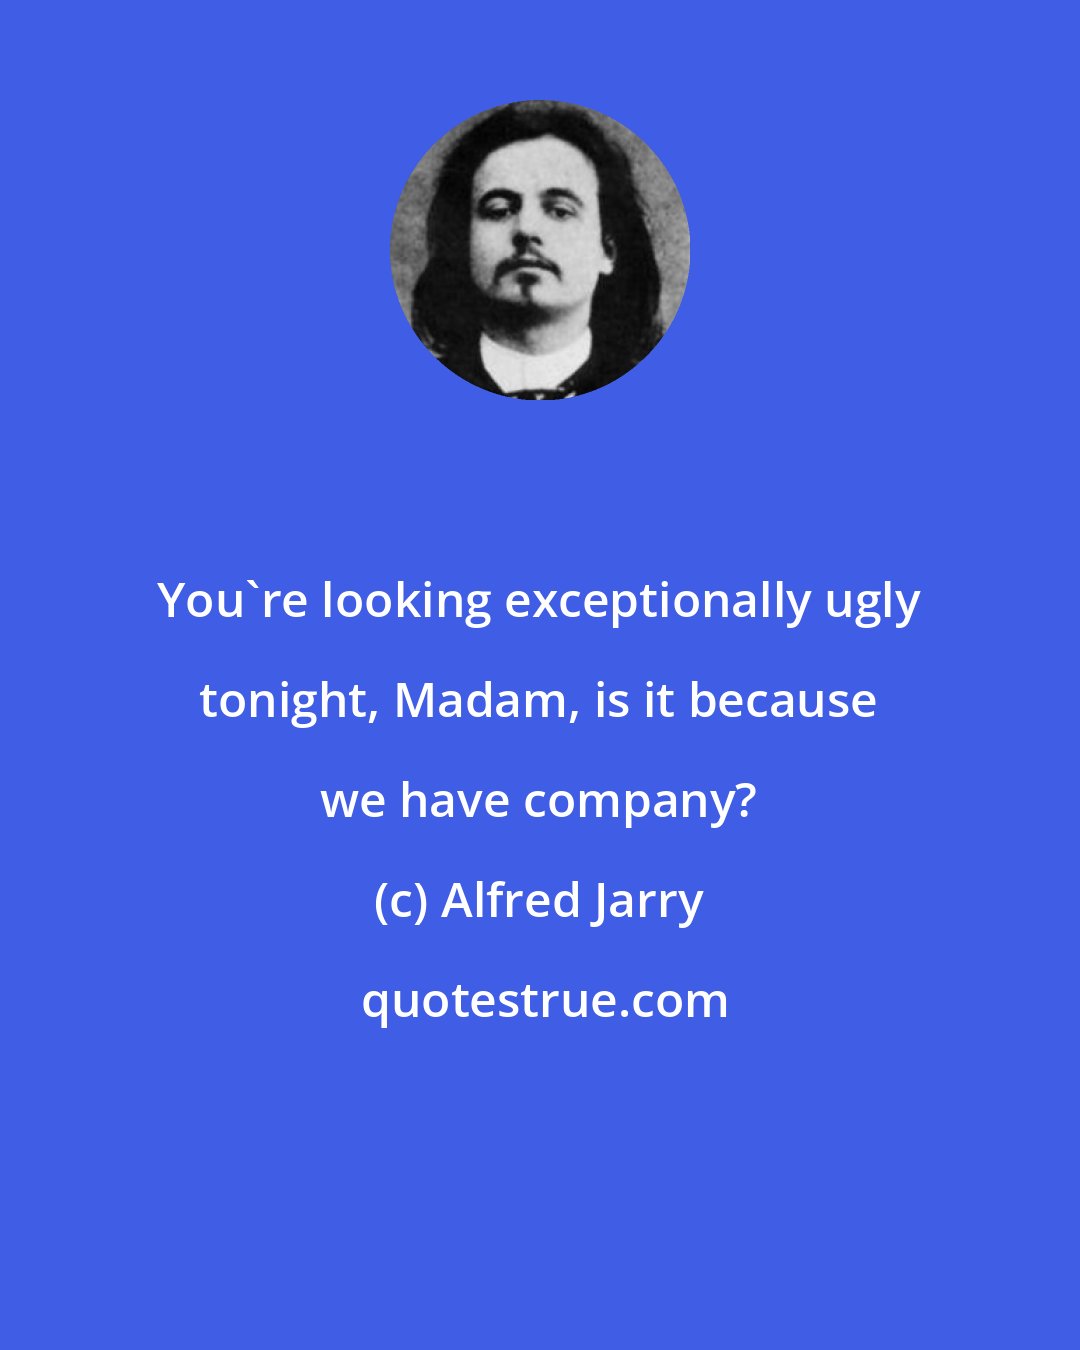 Alfred Jarry: You're looking exceptionally ugly tonight, Madam, is it because we have company?